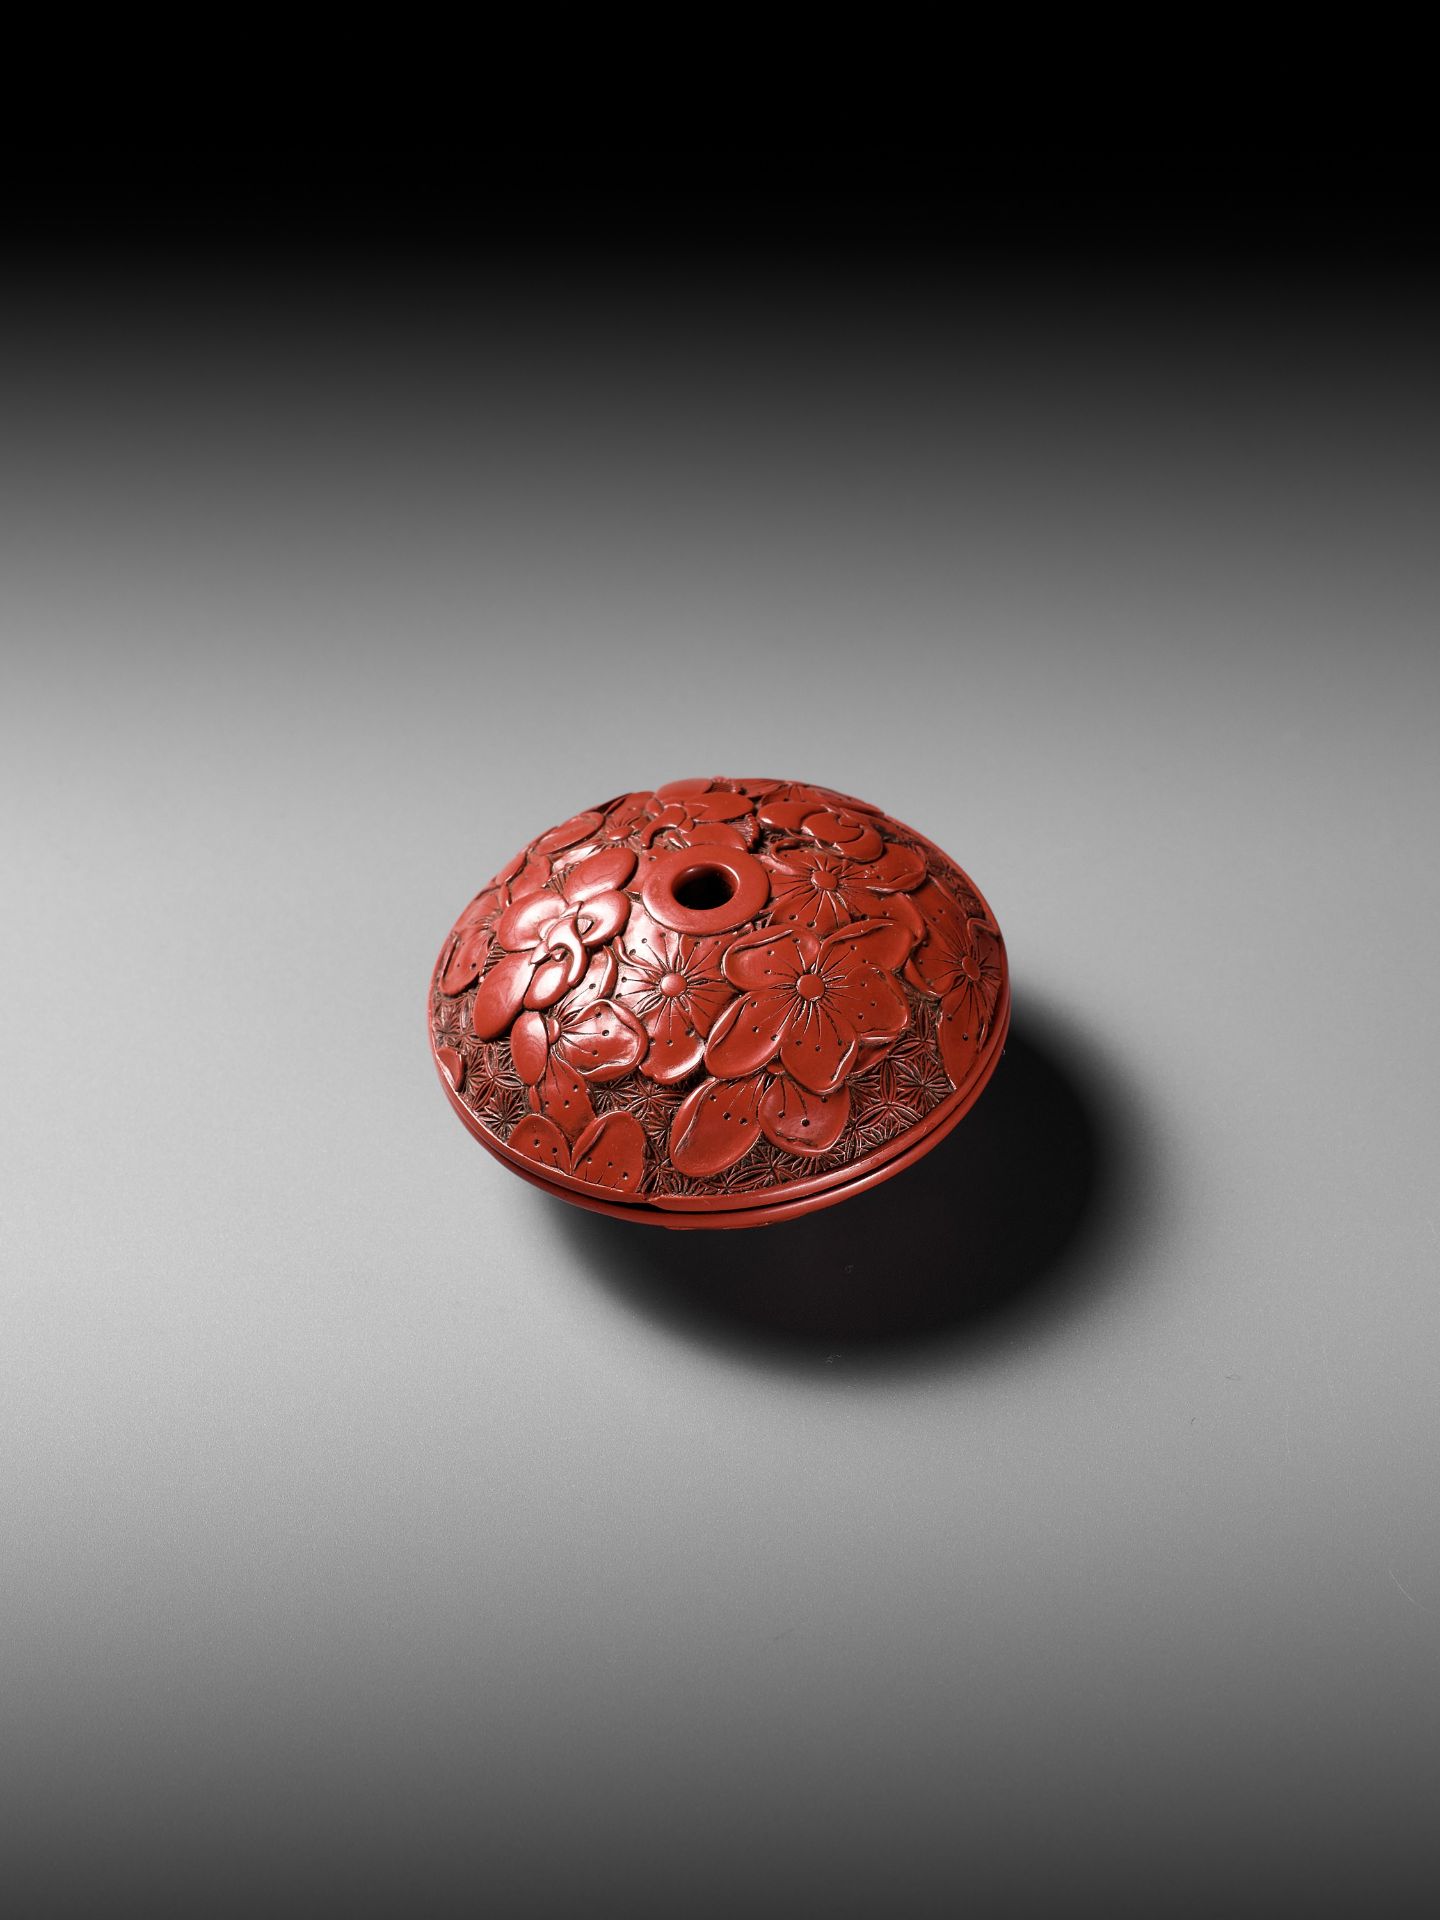 A FINE TSUISHU (CARVED RED LACQUER) MANJU NETSUKE WITH PEACH BLOSSOMS - Image 7 of 13